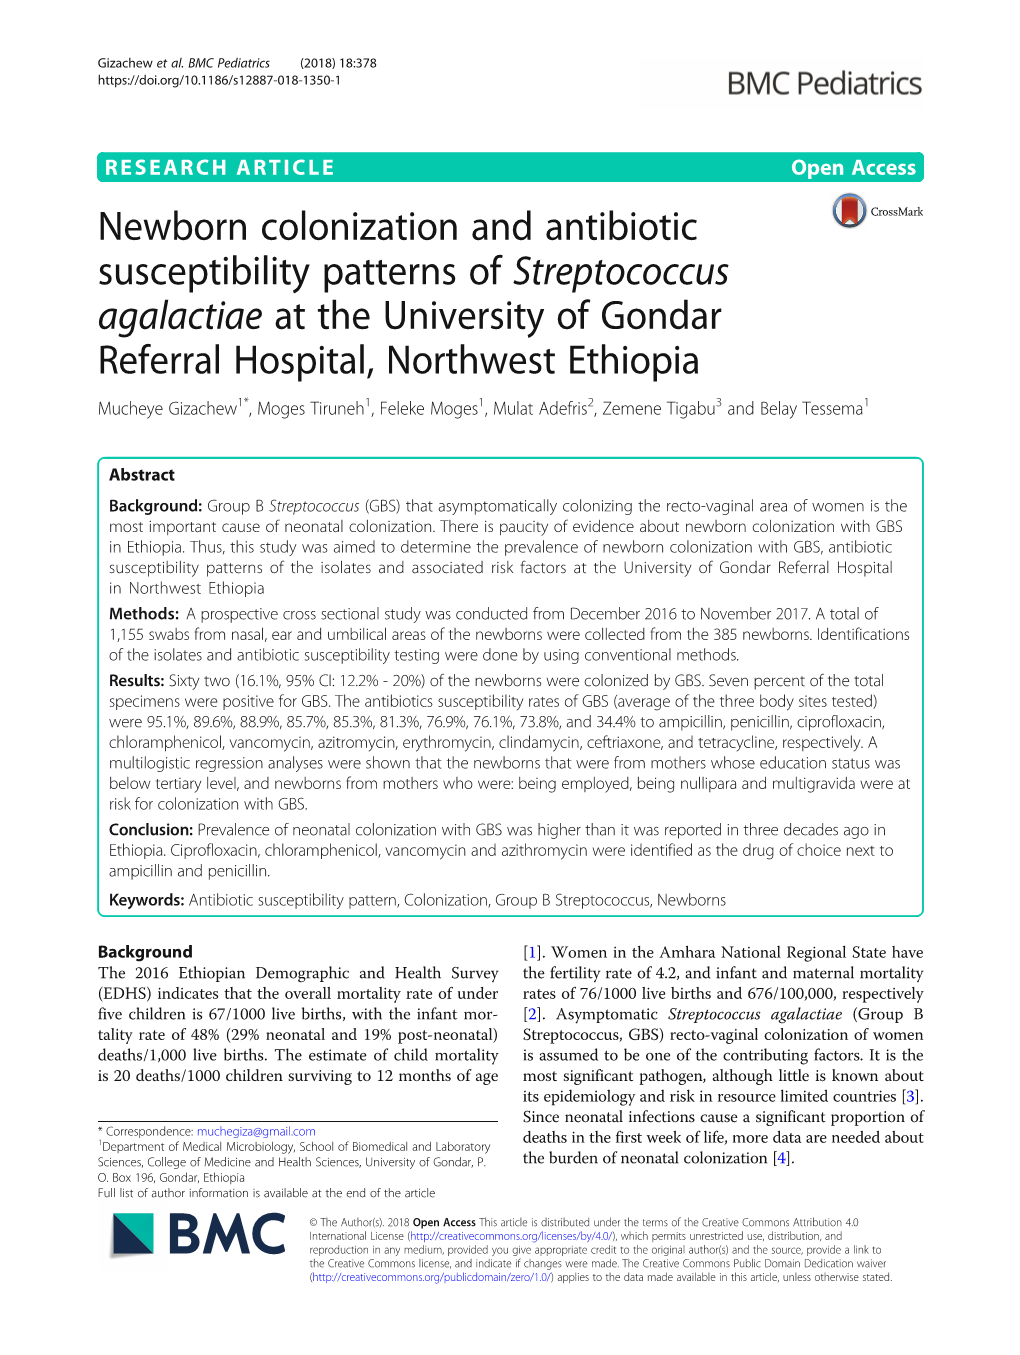 Newborn Colonization and Antibiotic Susceptibility Patterns of Streptococcus Agalactiae at the University of Gondar Referral